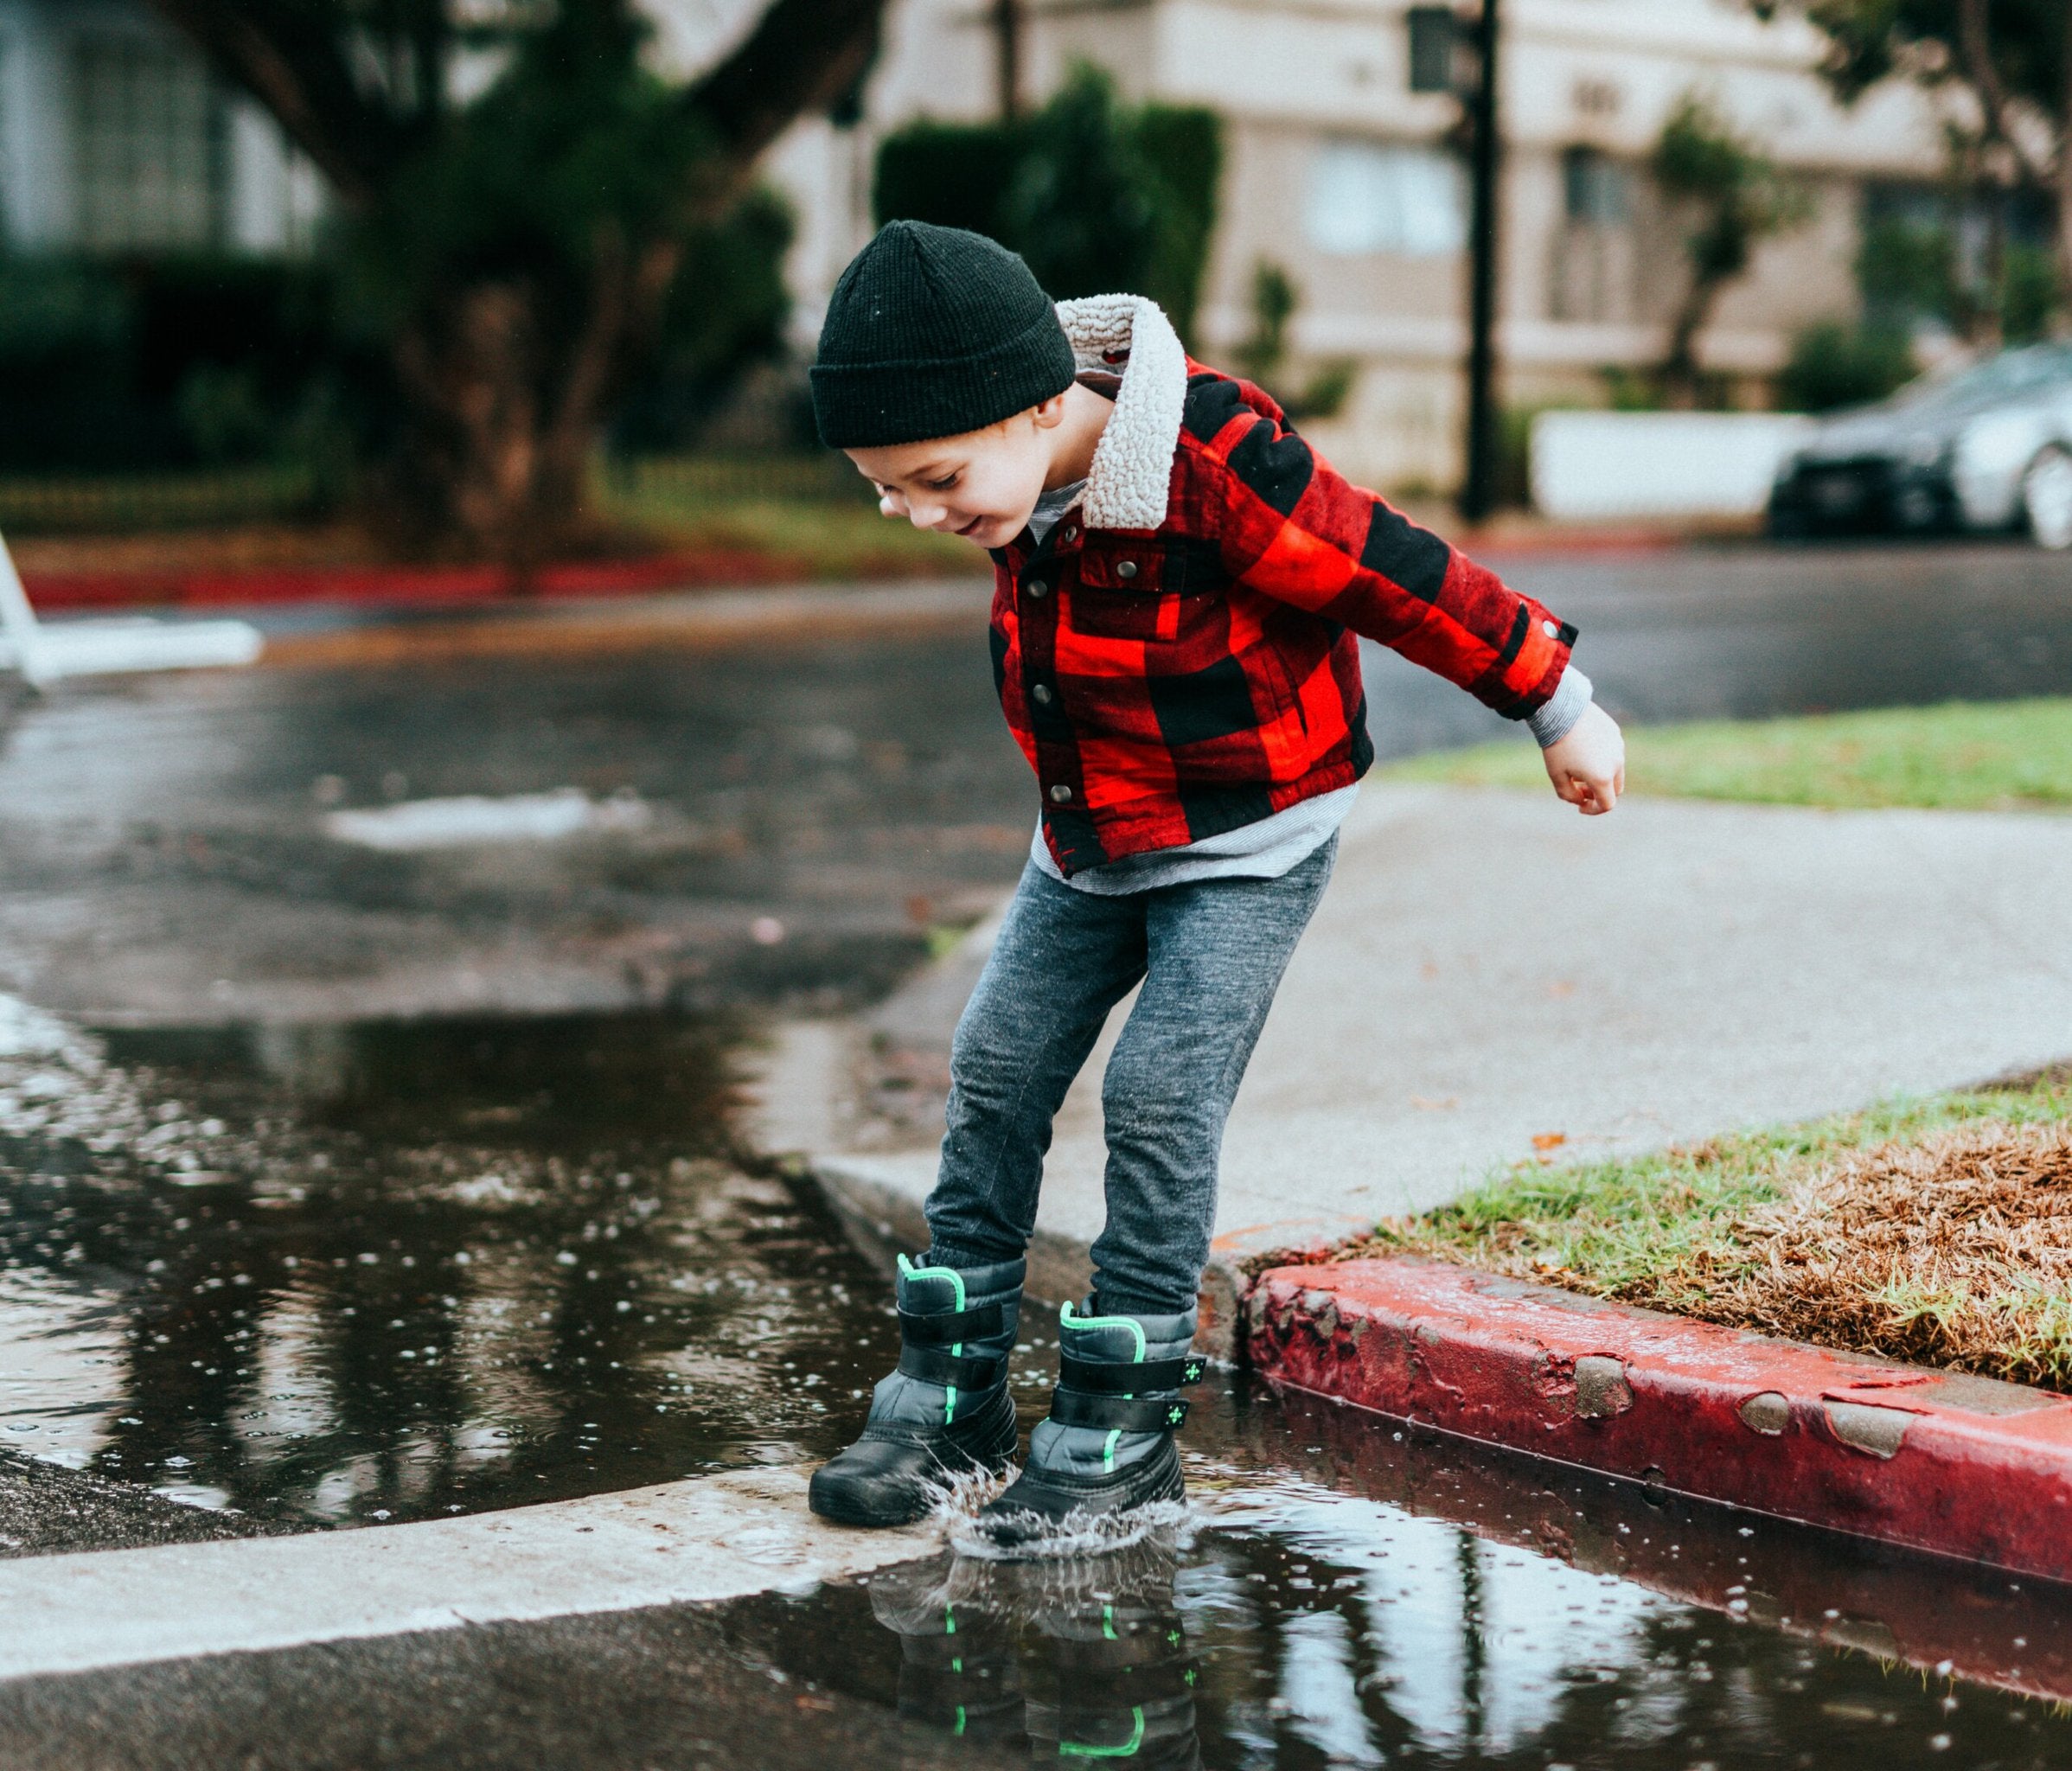 Child in red jacket jumping into a puddle